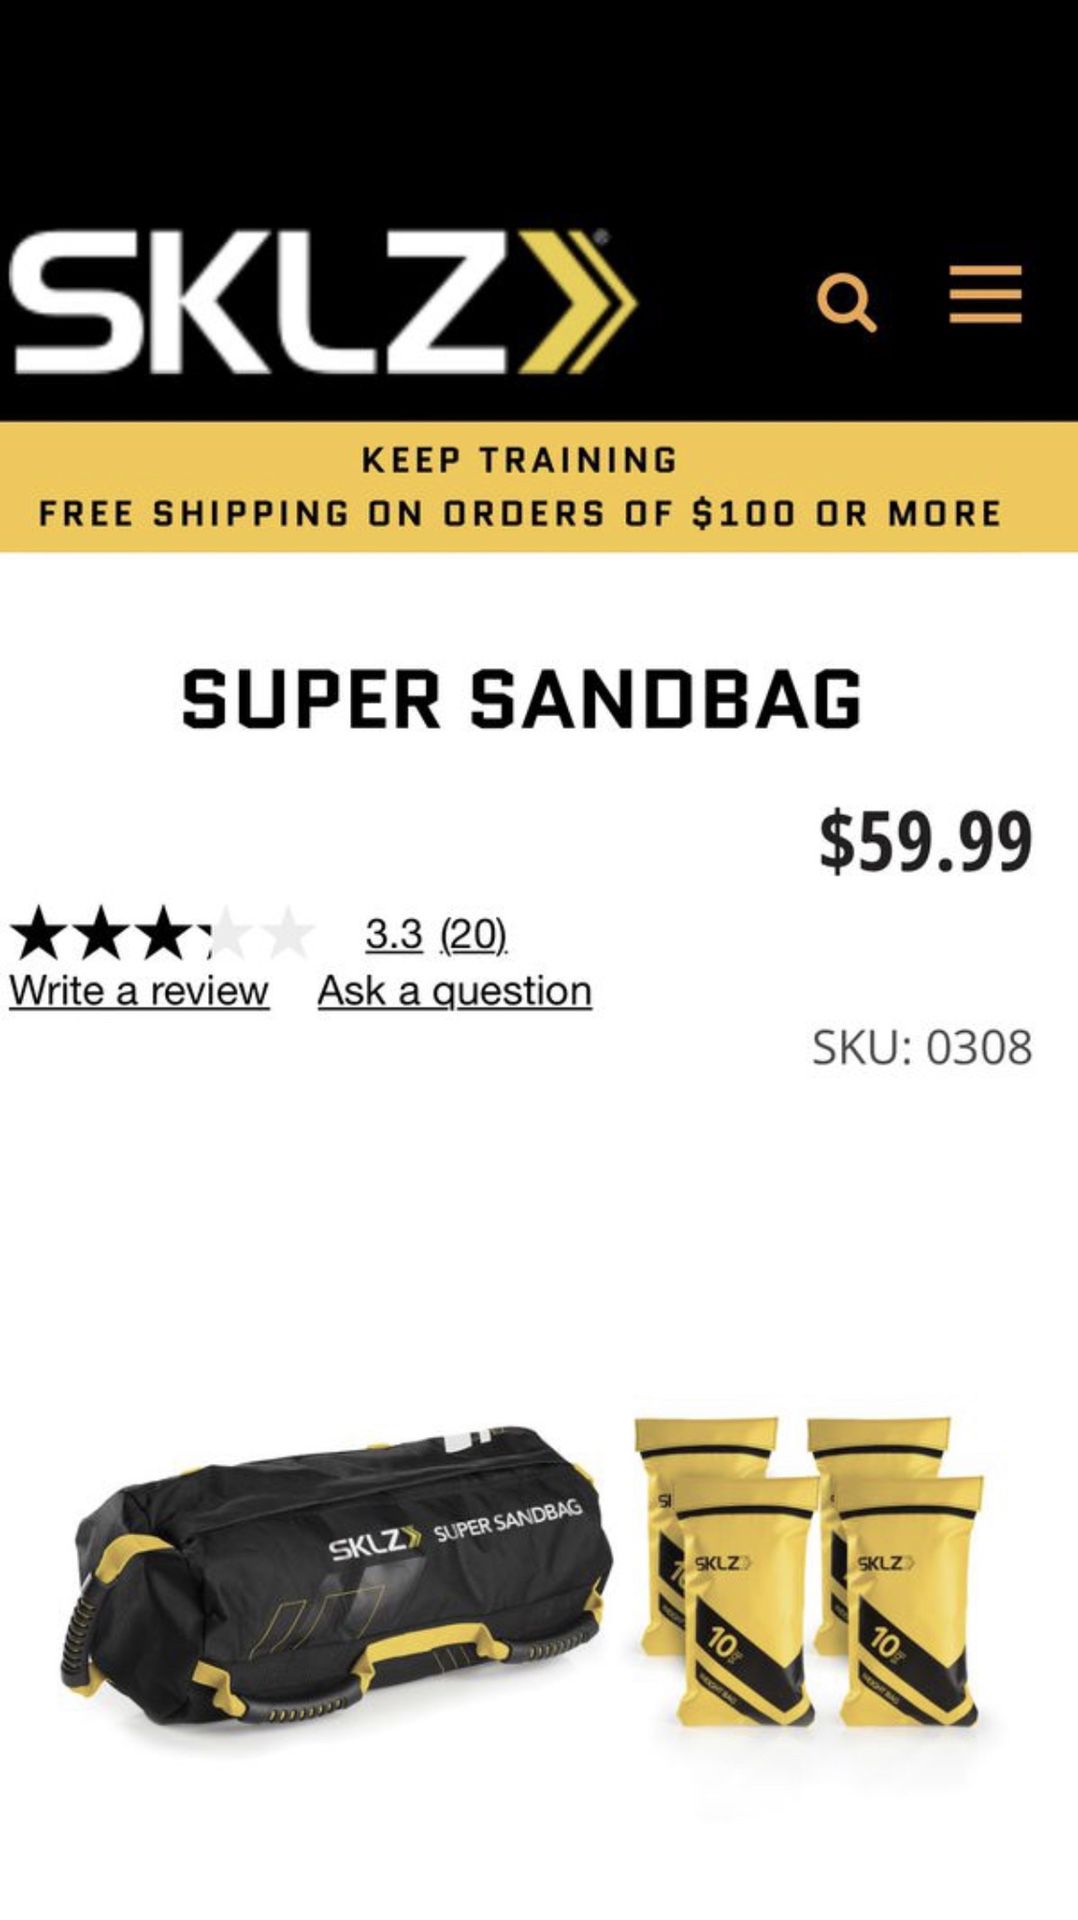 Sand bag - Adjustable weight - paid over $60